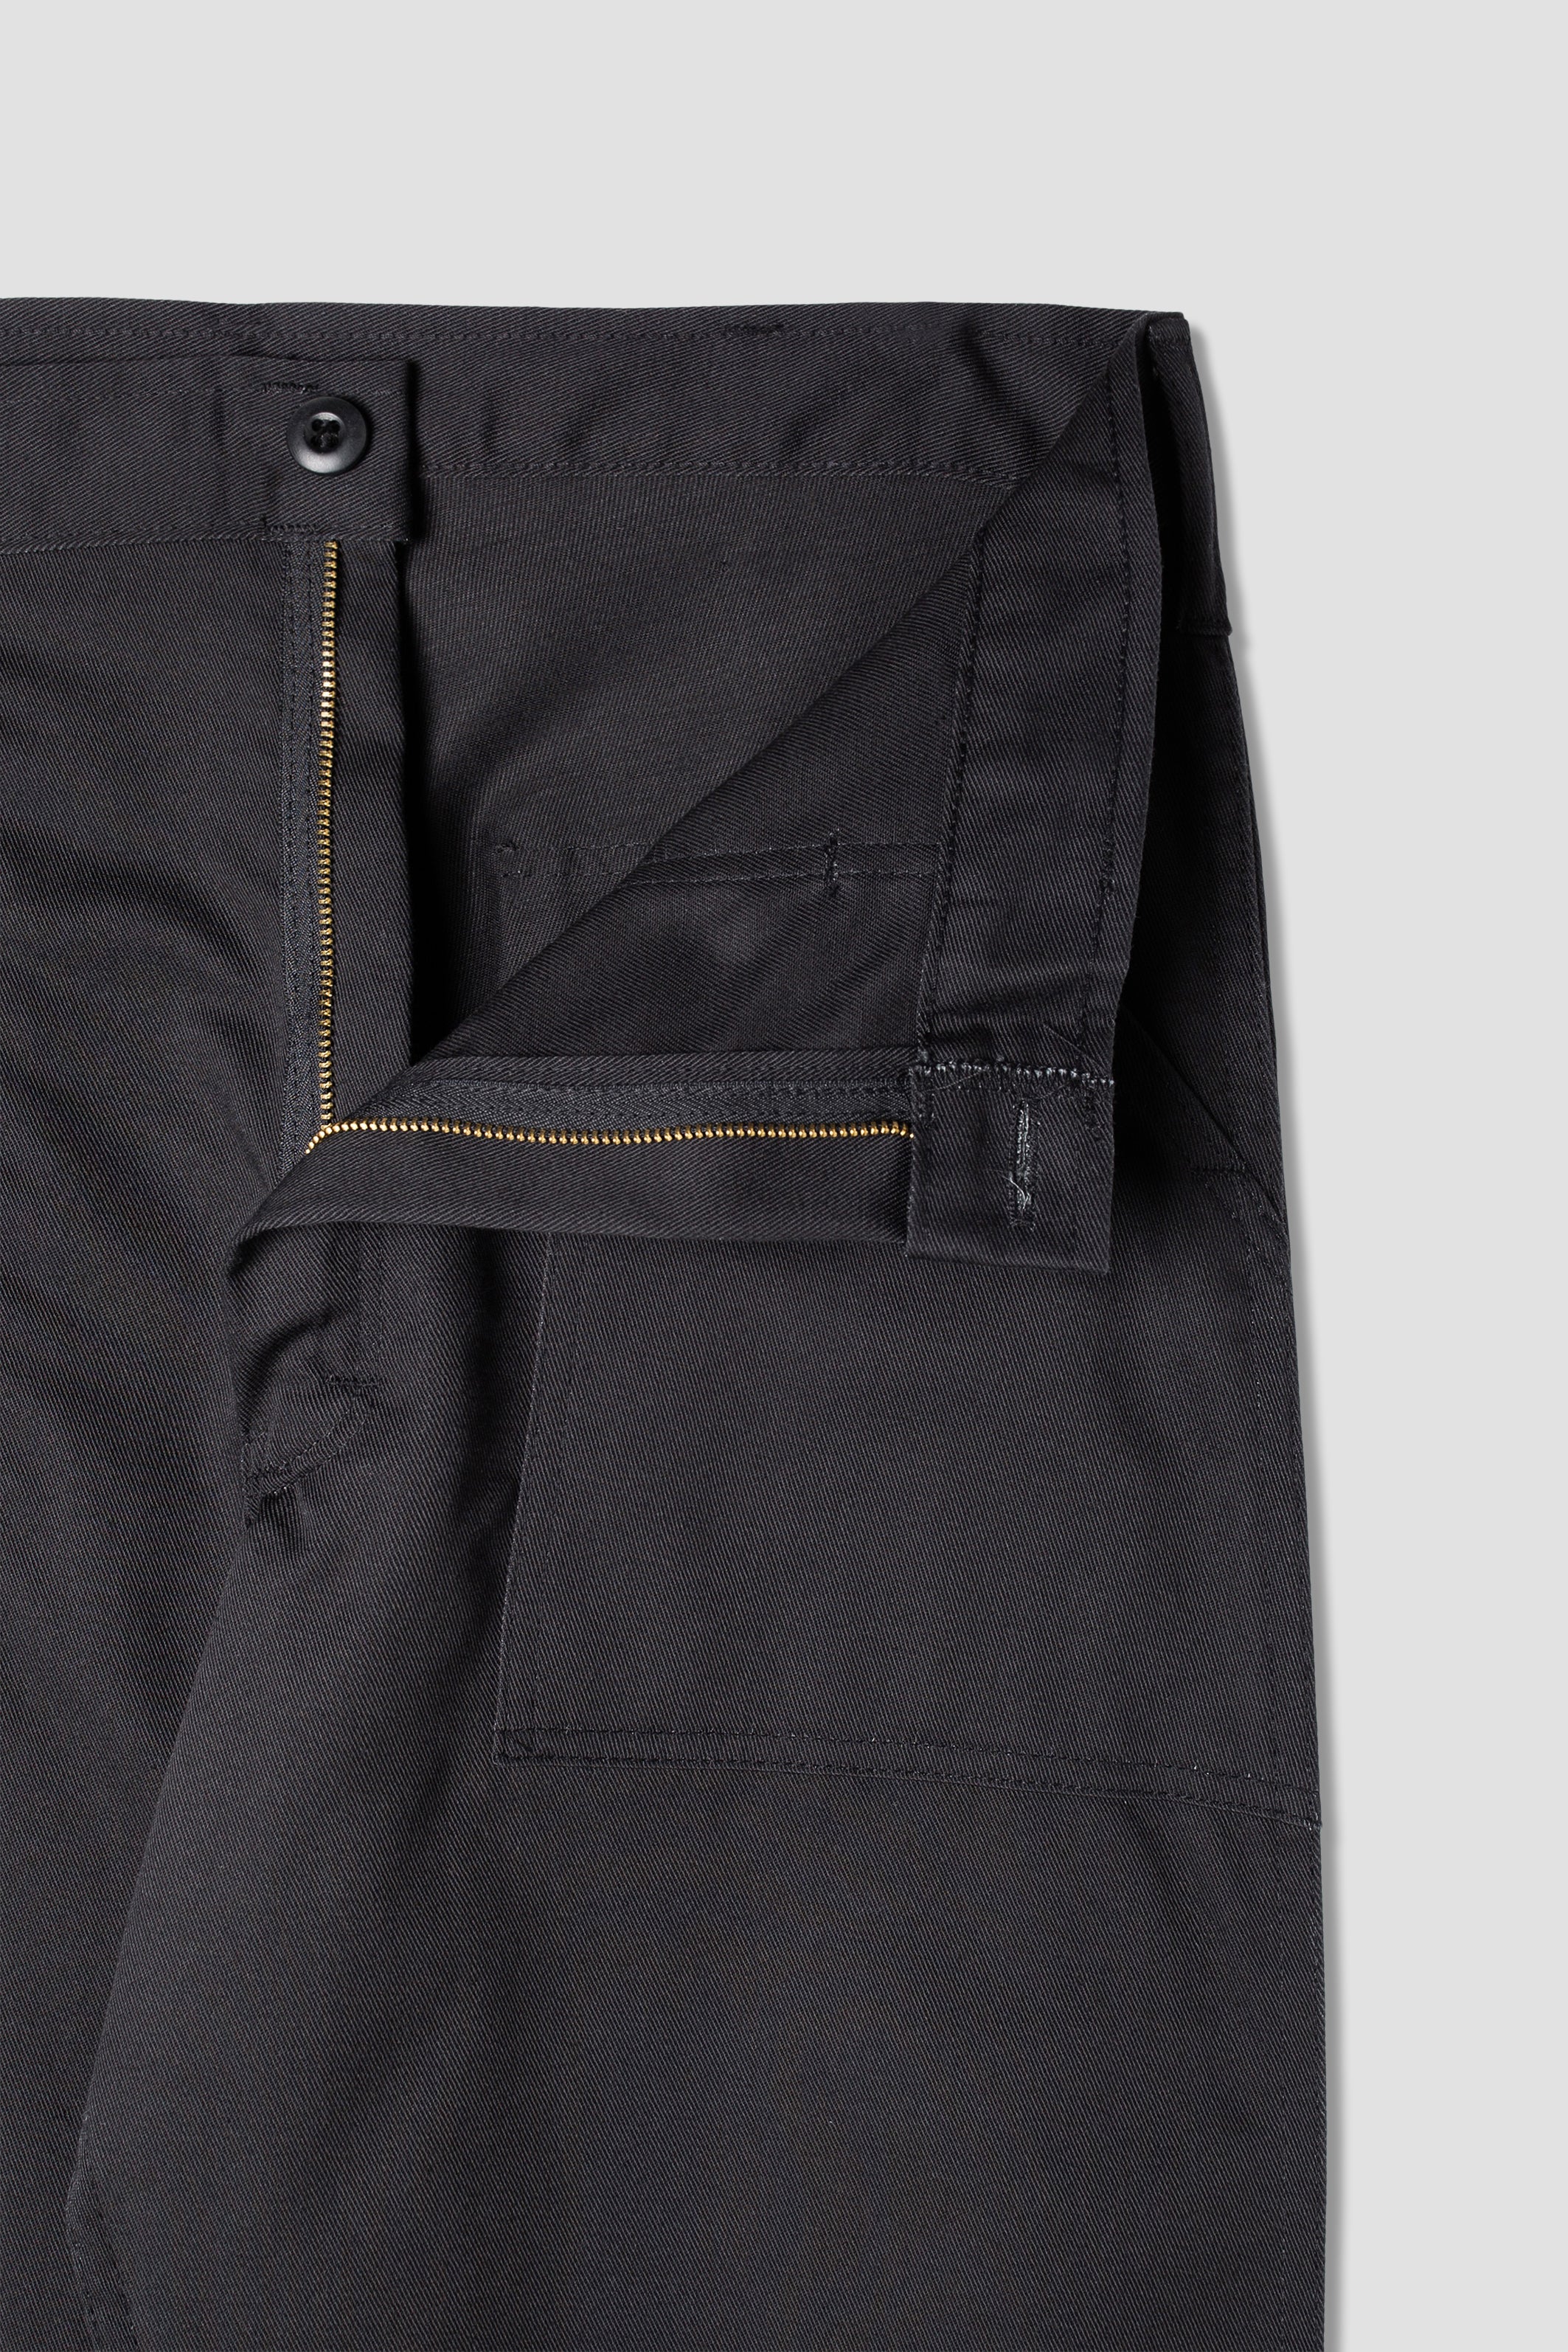 50s-60s black cotton twill Trousers - スラックス